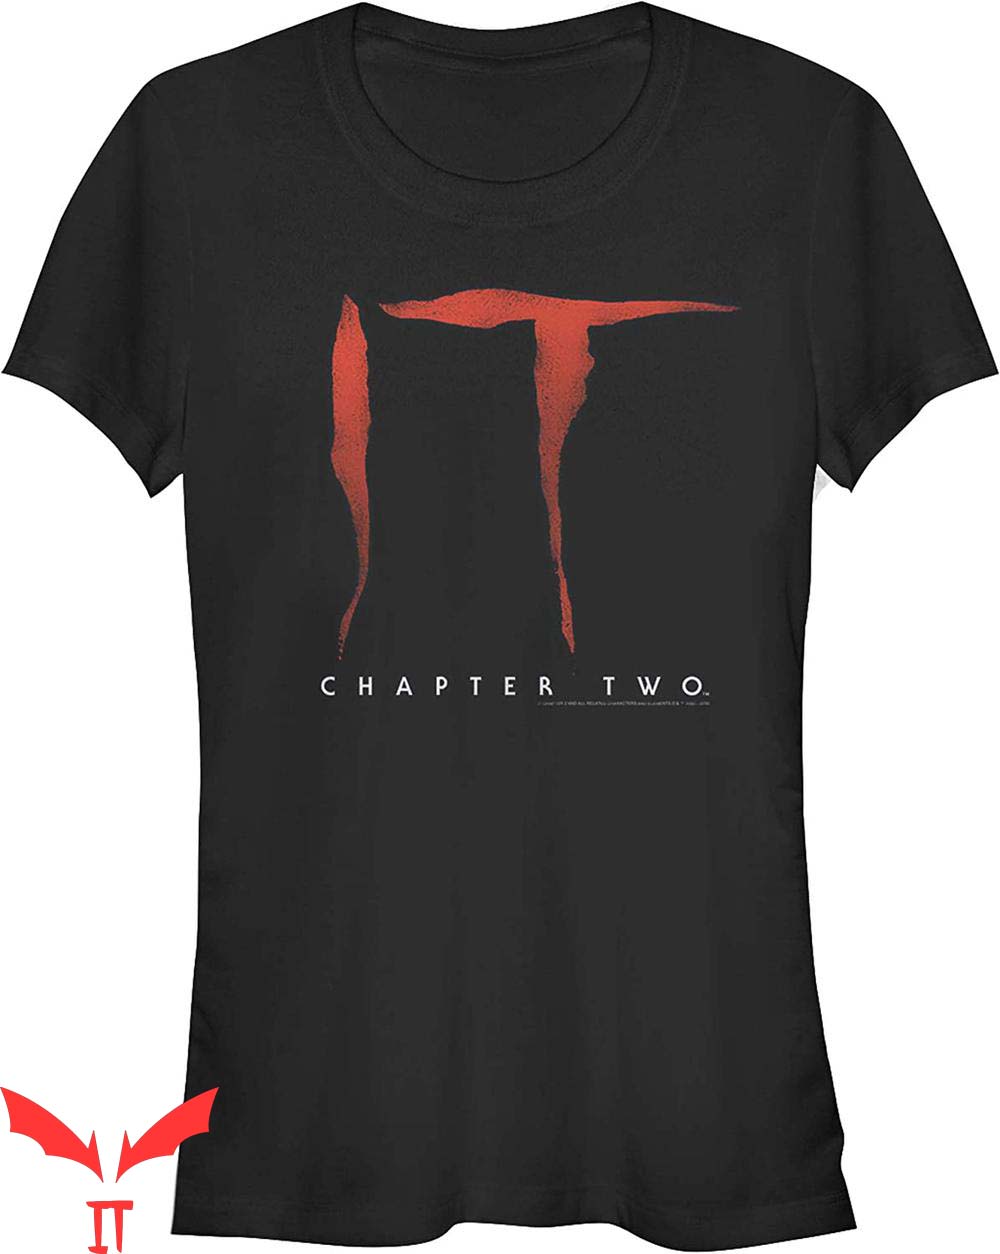 IT Chapter Two T-Shirt IT Classic Logo IT The Movie T-Shirt